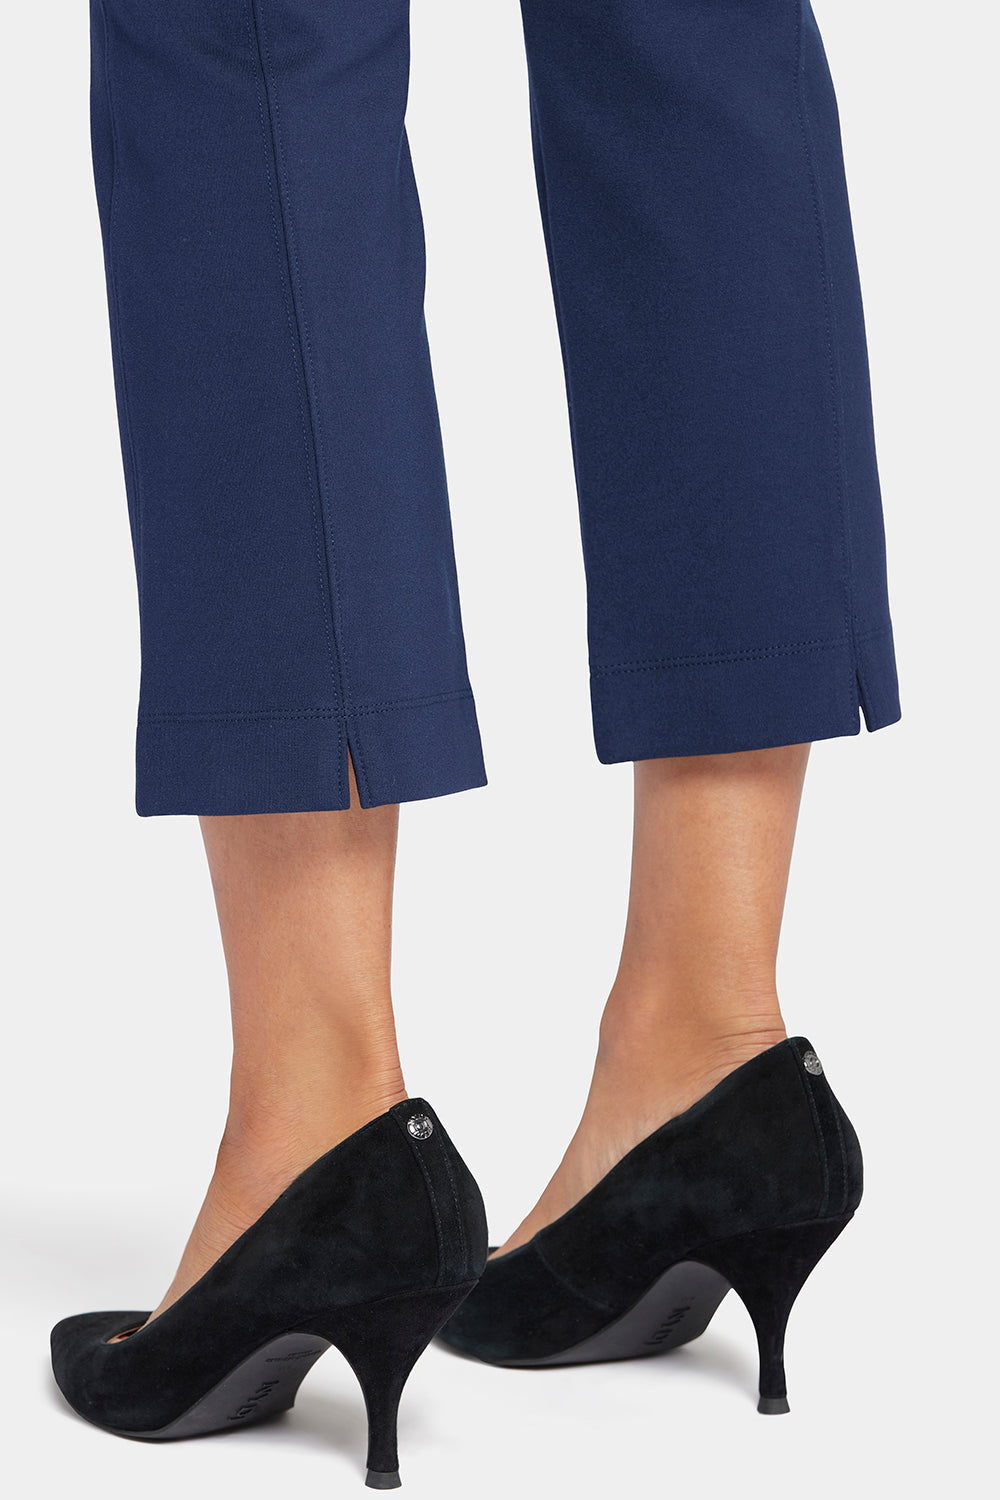 NYDJ Pull-On Straight Crop Pants Sculpt-Her™ Collection - Oxford Navy